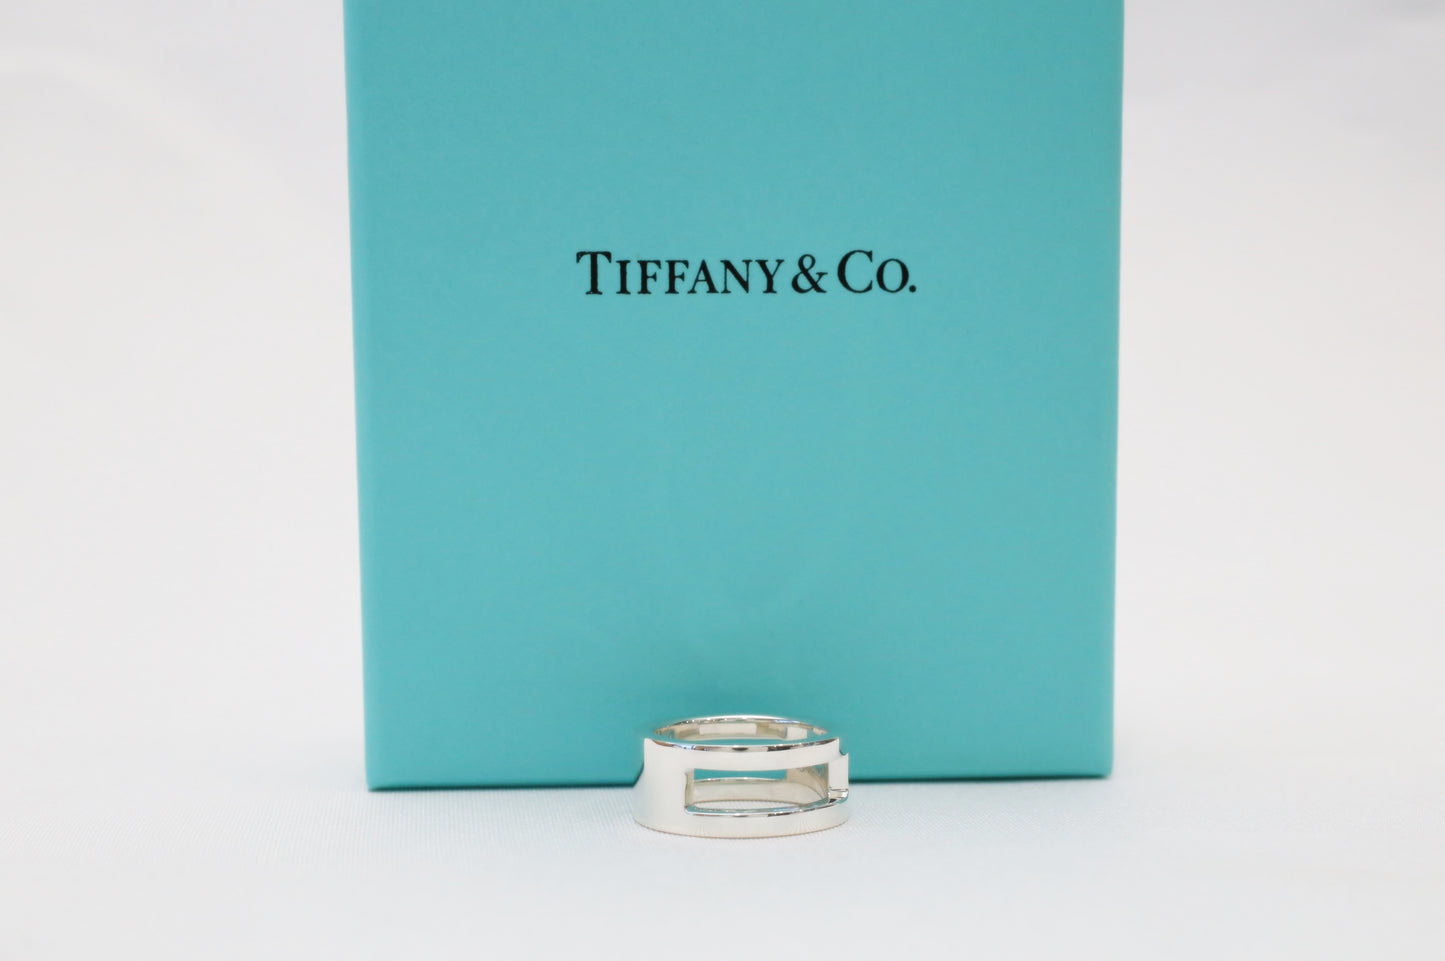 NEW Tiffany & Co. Sterling Silver Out of Retirement ID Ring, Size 6 - 7.4g